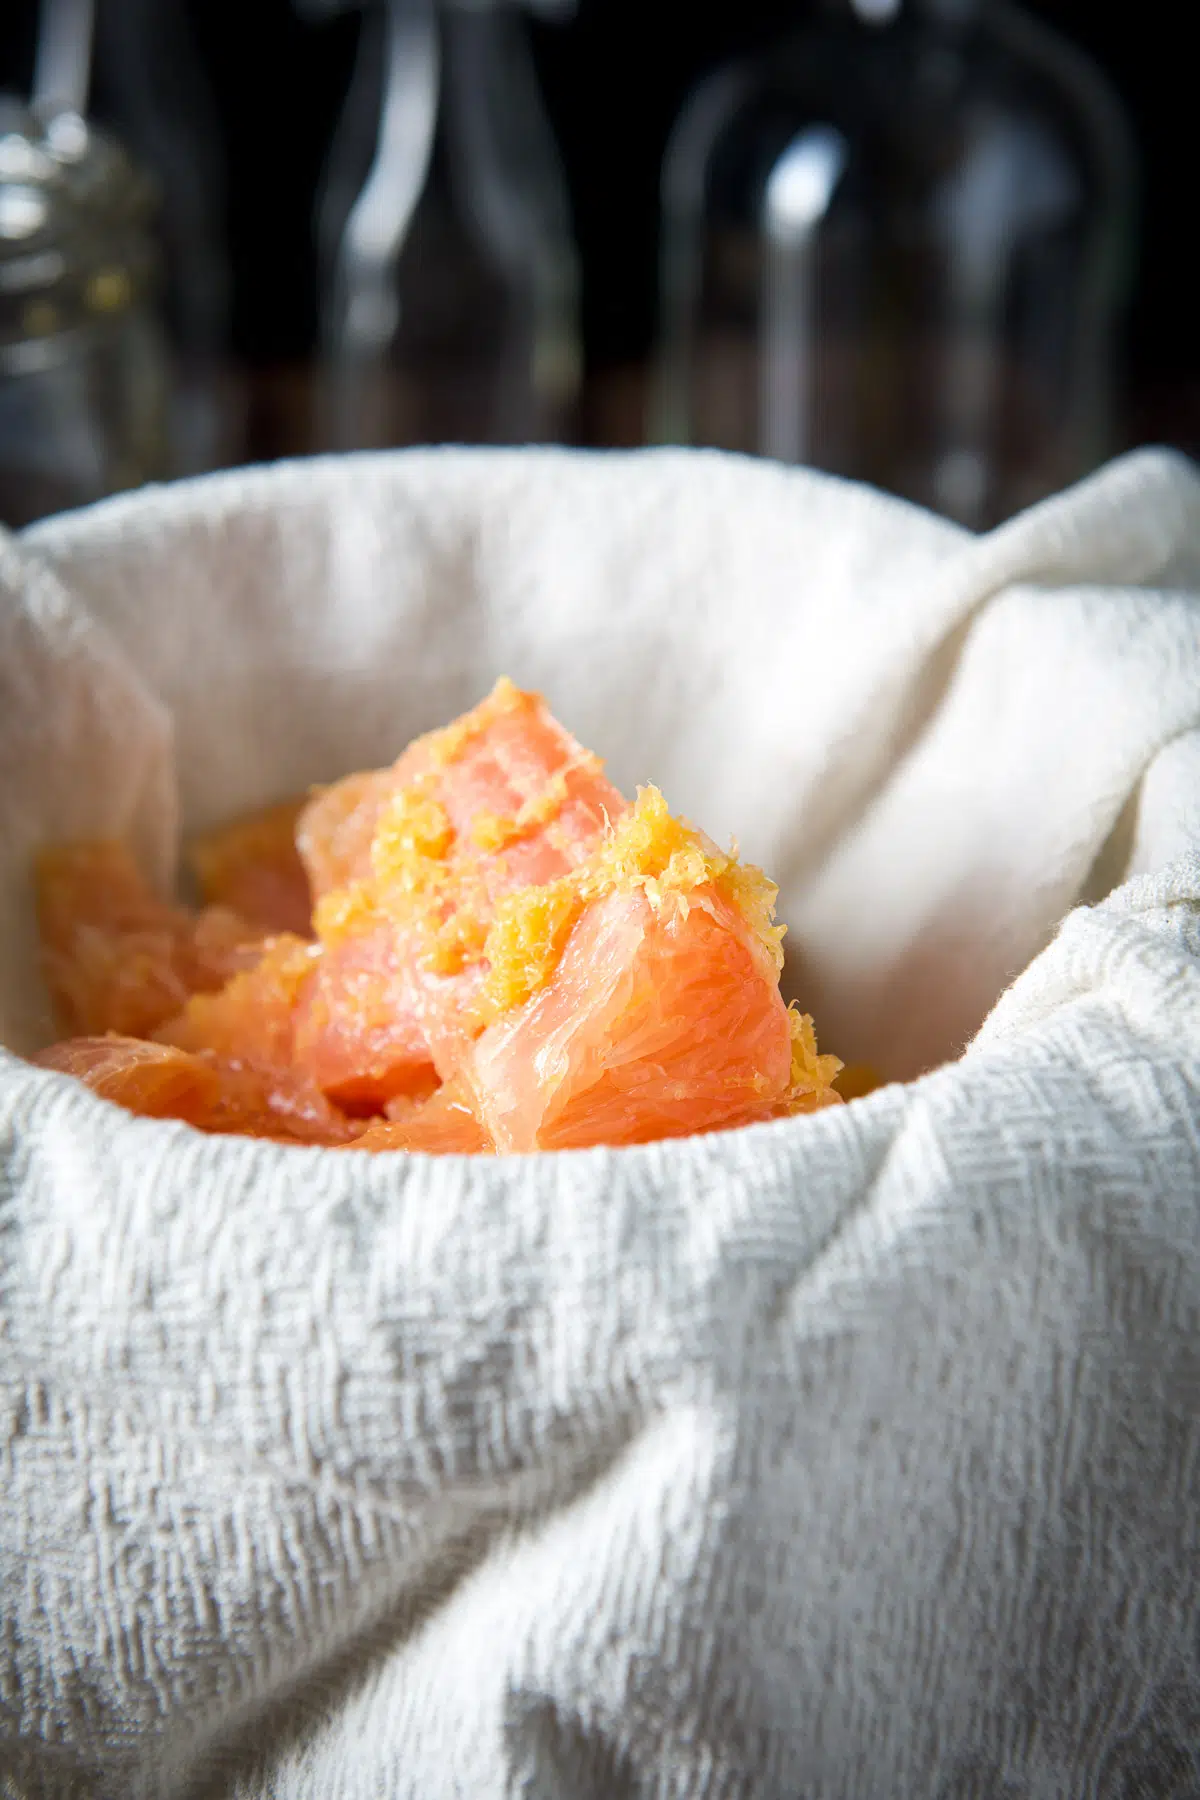 Cheesecloth straining the grapefruit and zest into a bowl